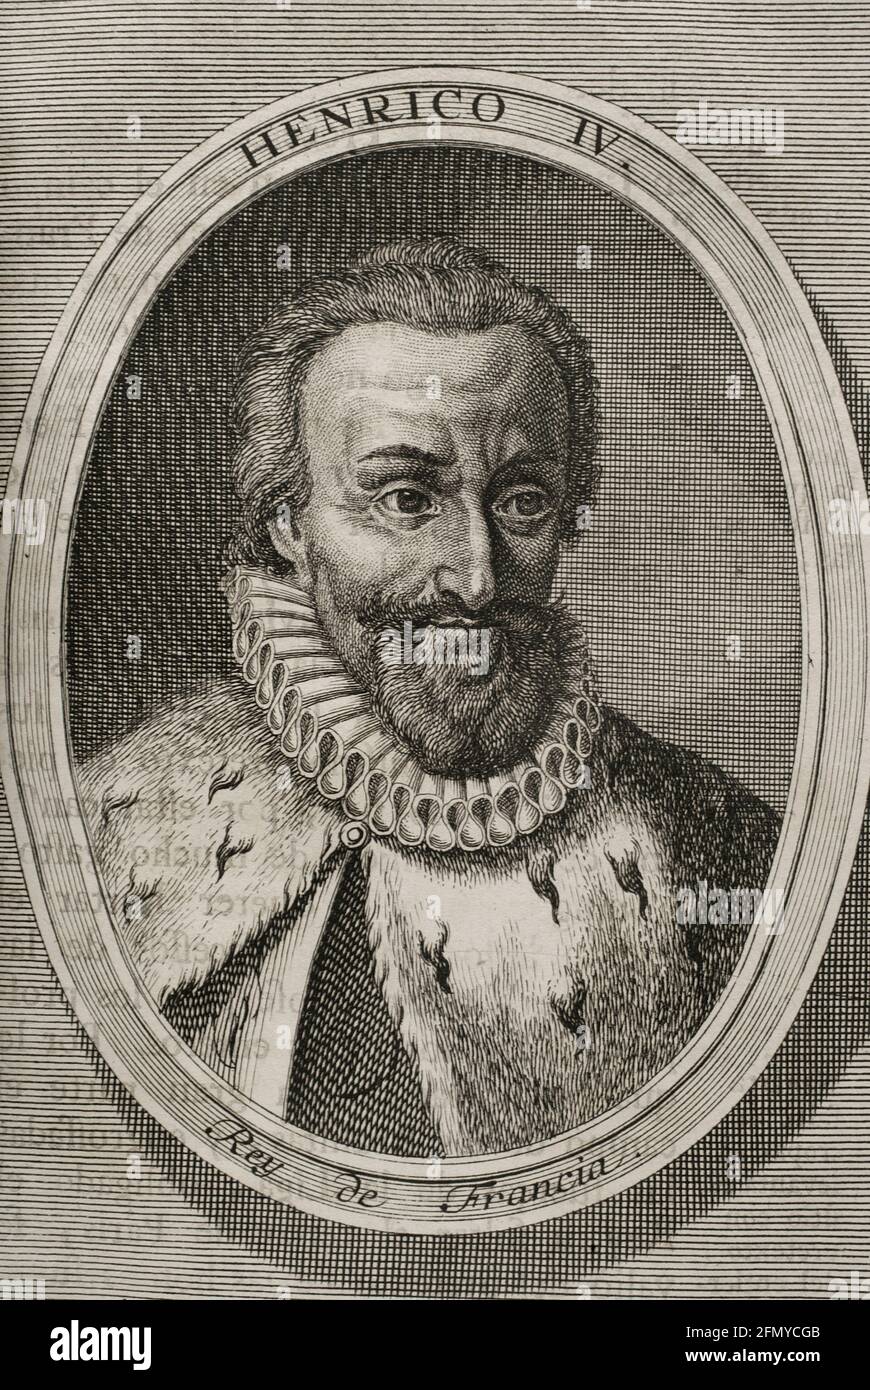 Henry IV the Great (1553-1610). King of Navarre as Henry III (1572-1610) and King of France as Henry IV (1589-1610). Chief of the Huguenots (1569). Portrait. Engraving. Wars of Flanders. Edition published in Antwerp, 1748. Stock Photo